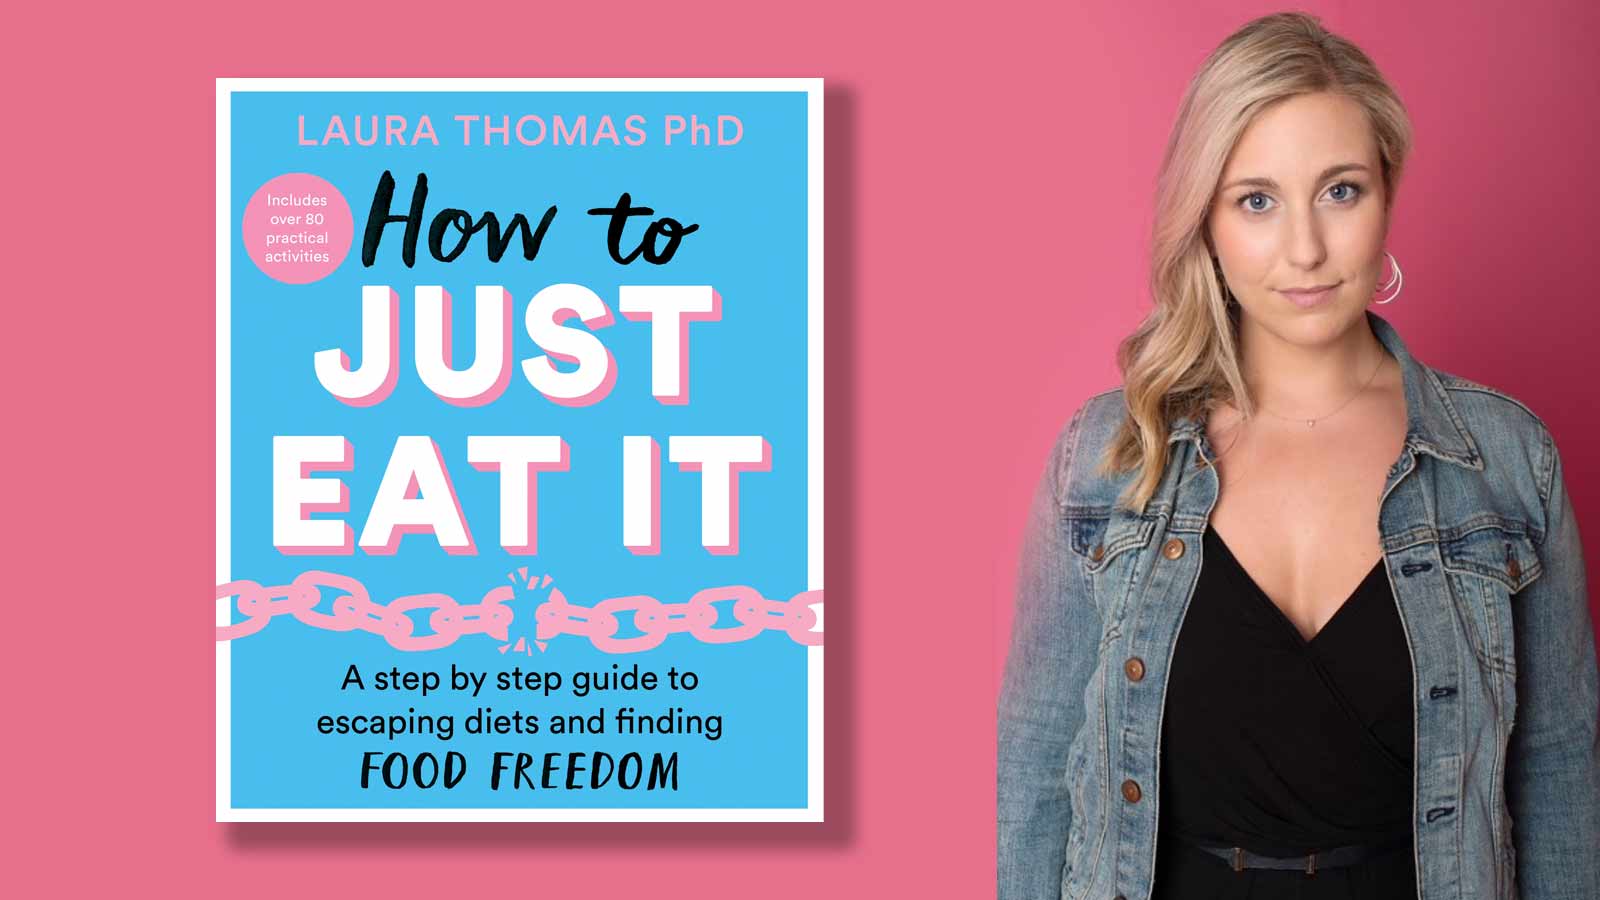 Laura Thomas and the cover of How to Just Eat It